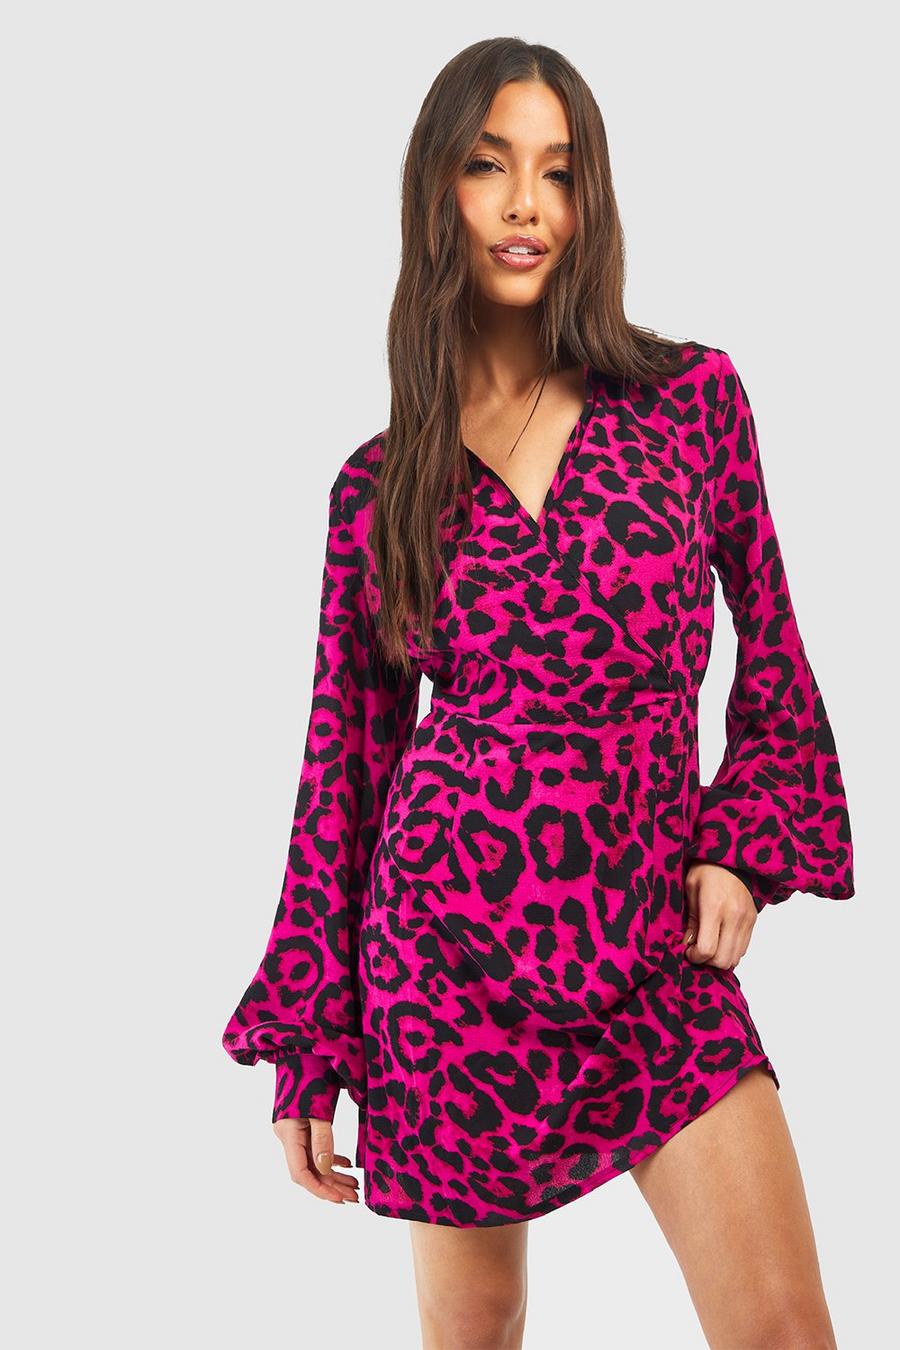 Robe chemise léopard, Hot pink image number 1